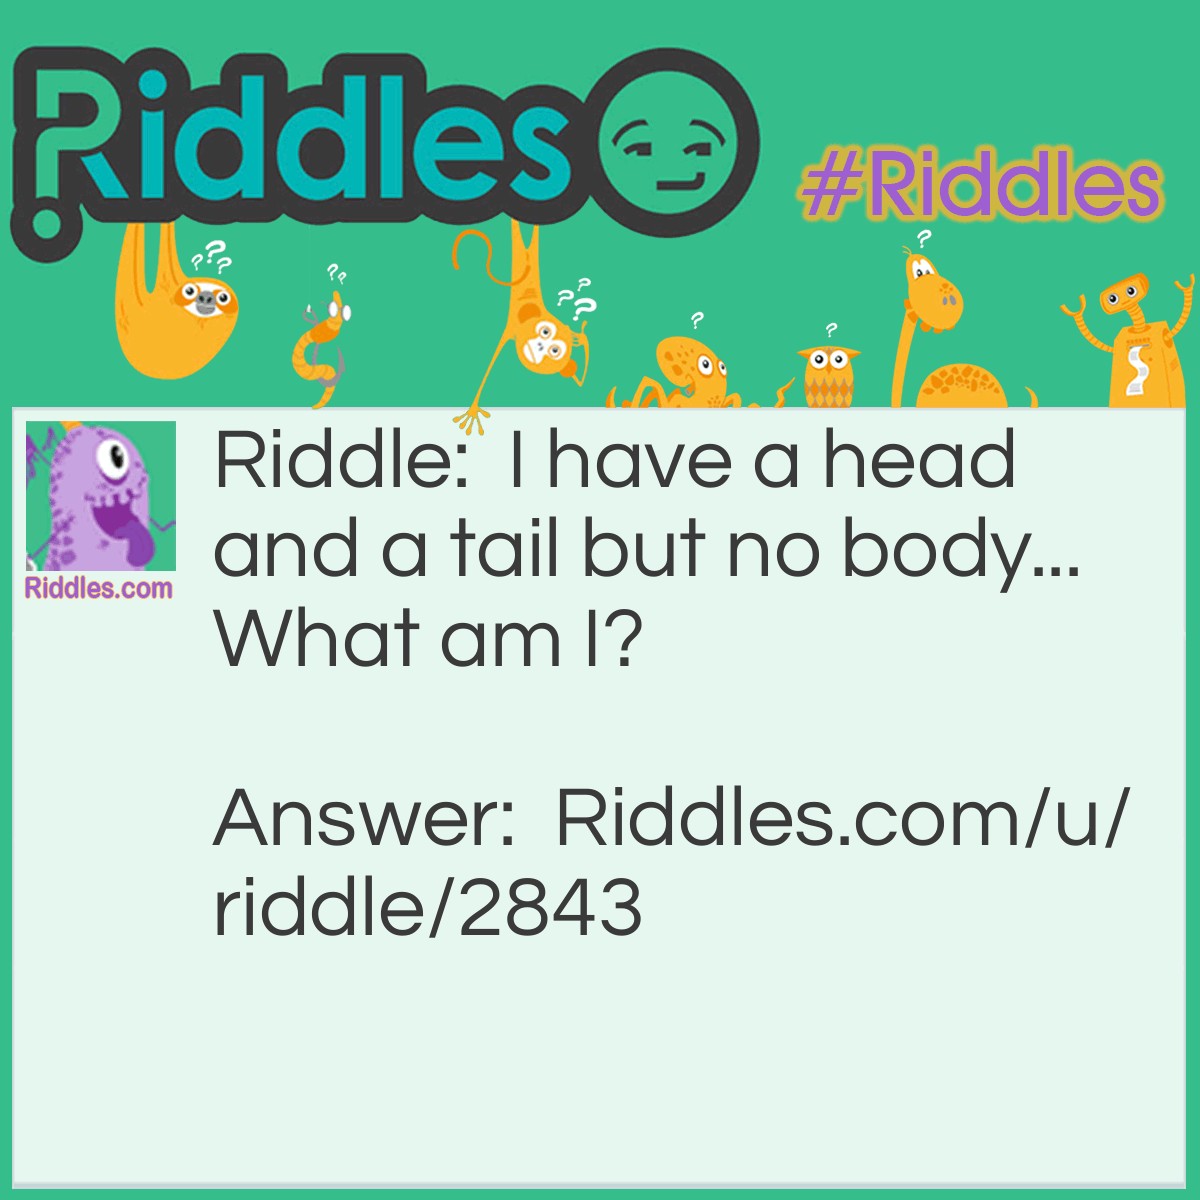 Riddle: I have a head and a tail but no body... What am I? Answer: A coin.